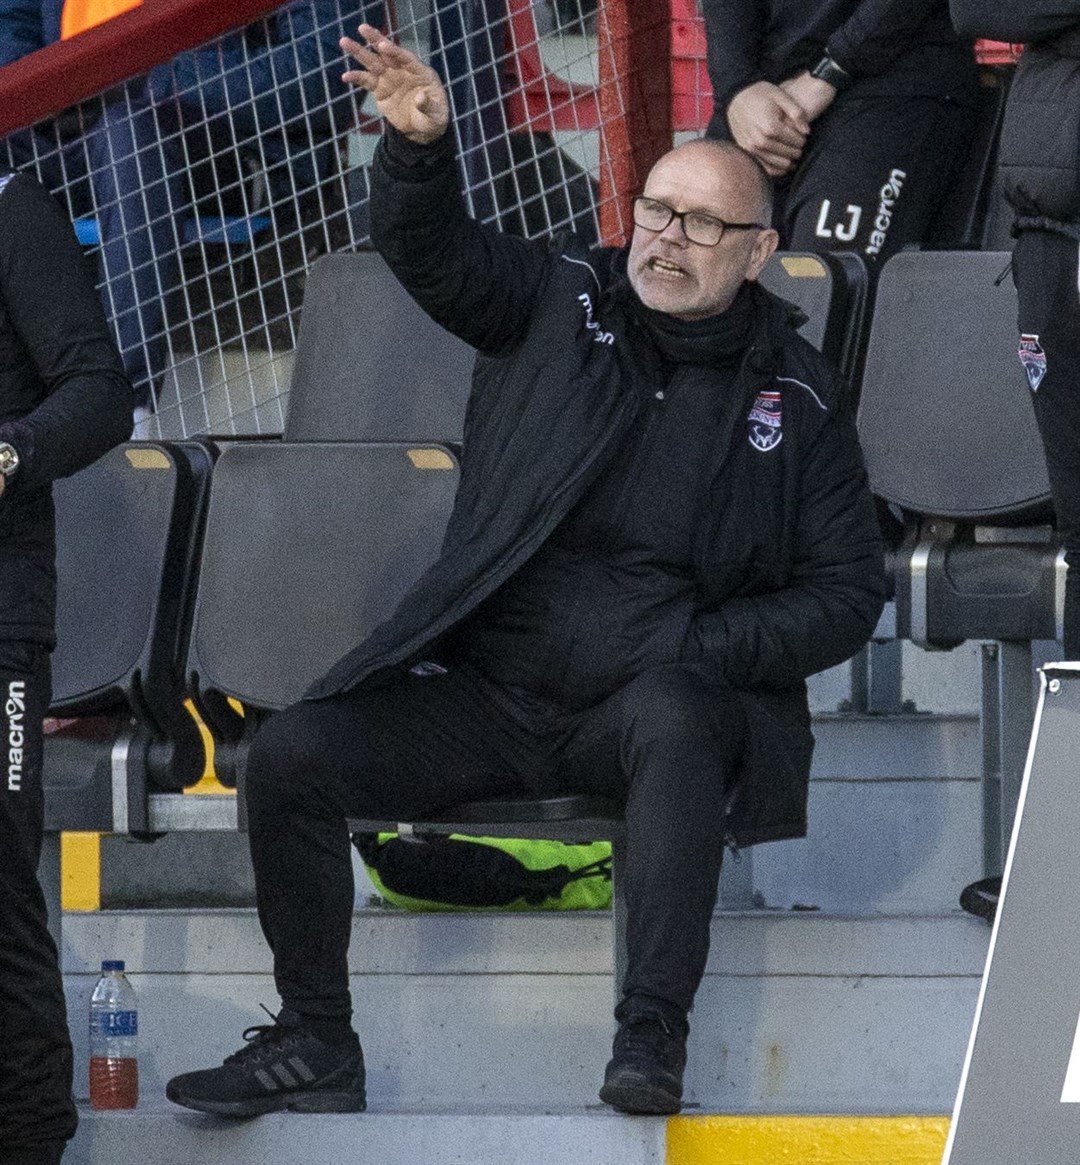 Picture - Ken Macpherson, Inverness. Ross County(1) v St.Mirren(3). 21.04.21. Ross County manager John Hughes.